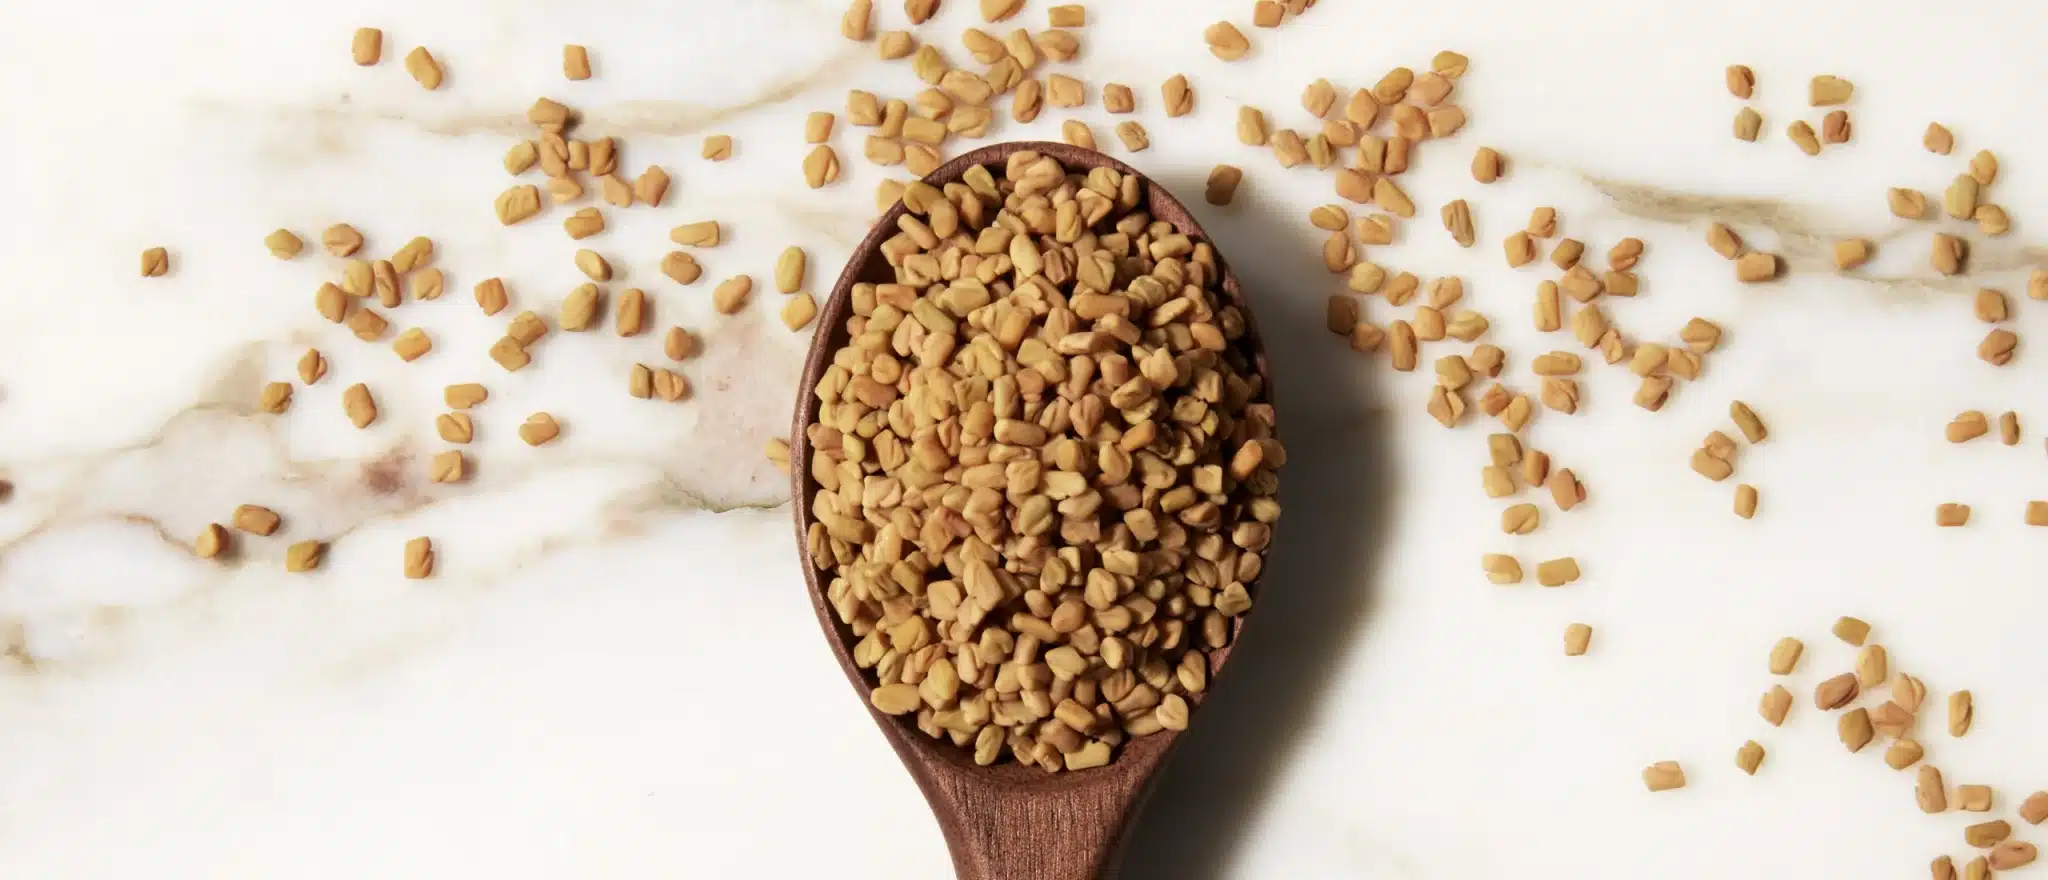 Can Fenugreek Really Boost Testosterone? Here’s Your Final, Expert-Backed Answer